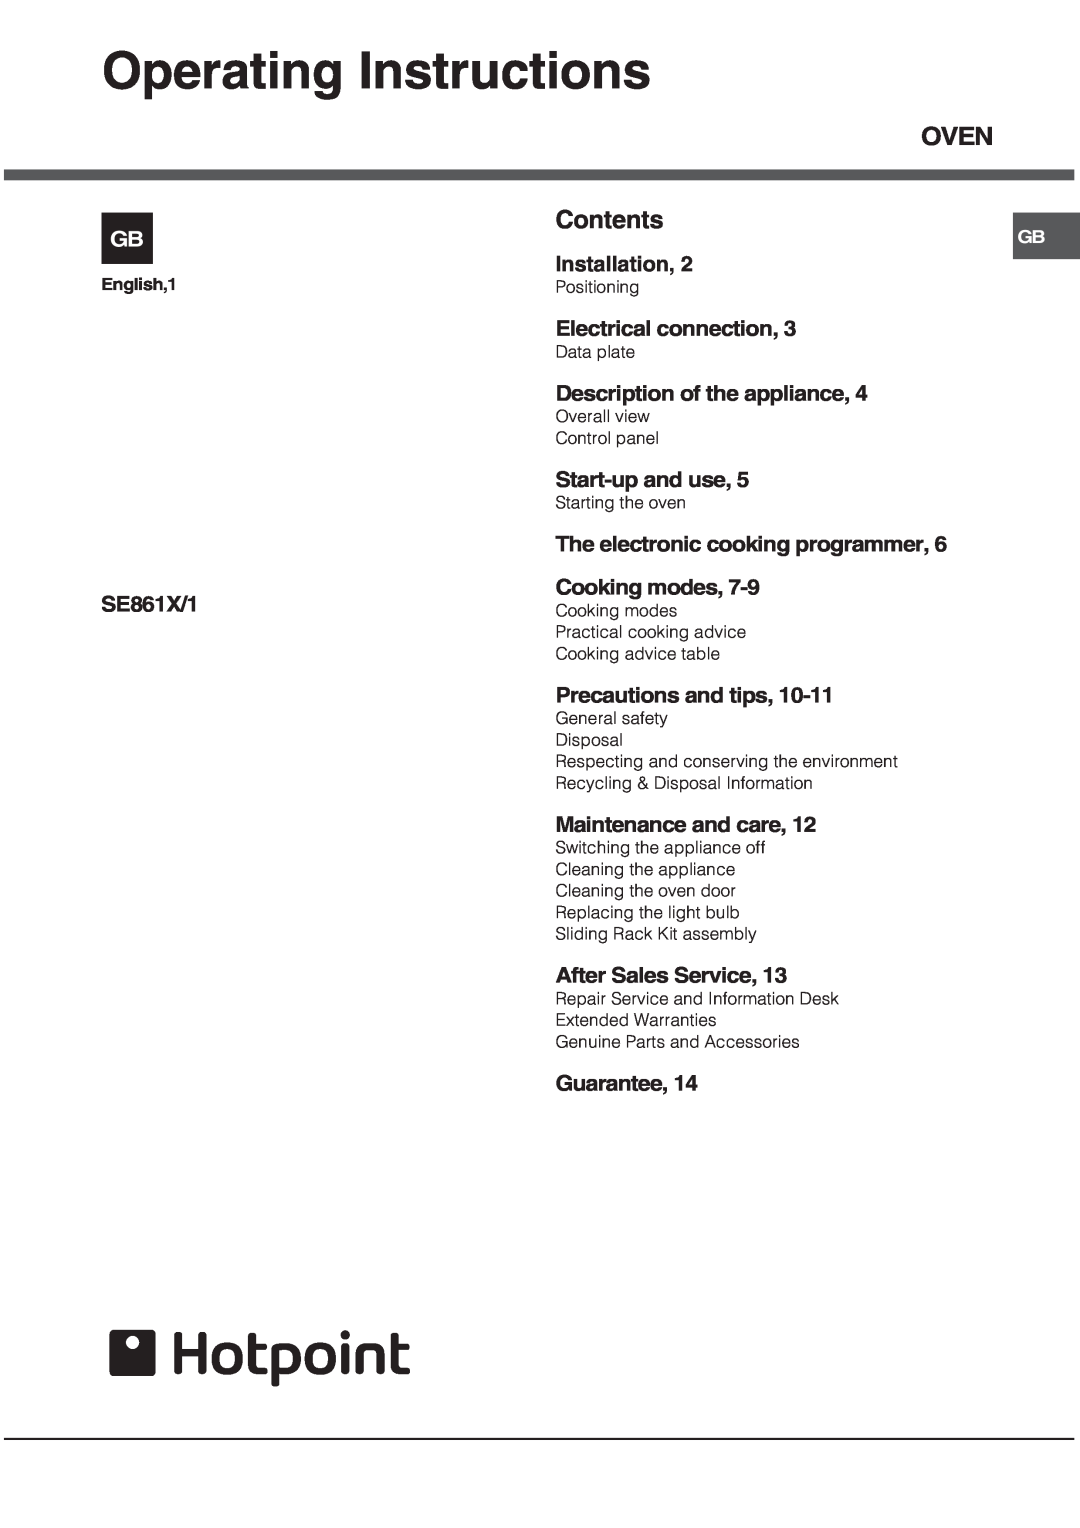 Hotpoint SE861X/1 manual Operating Instructions, OVEN Contents 